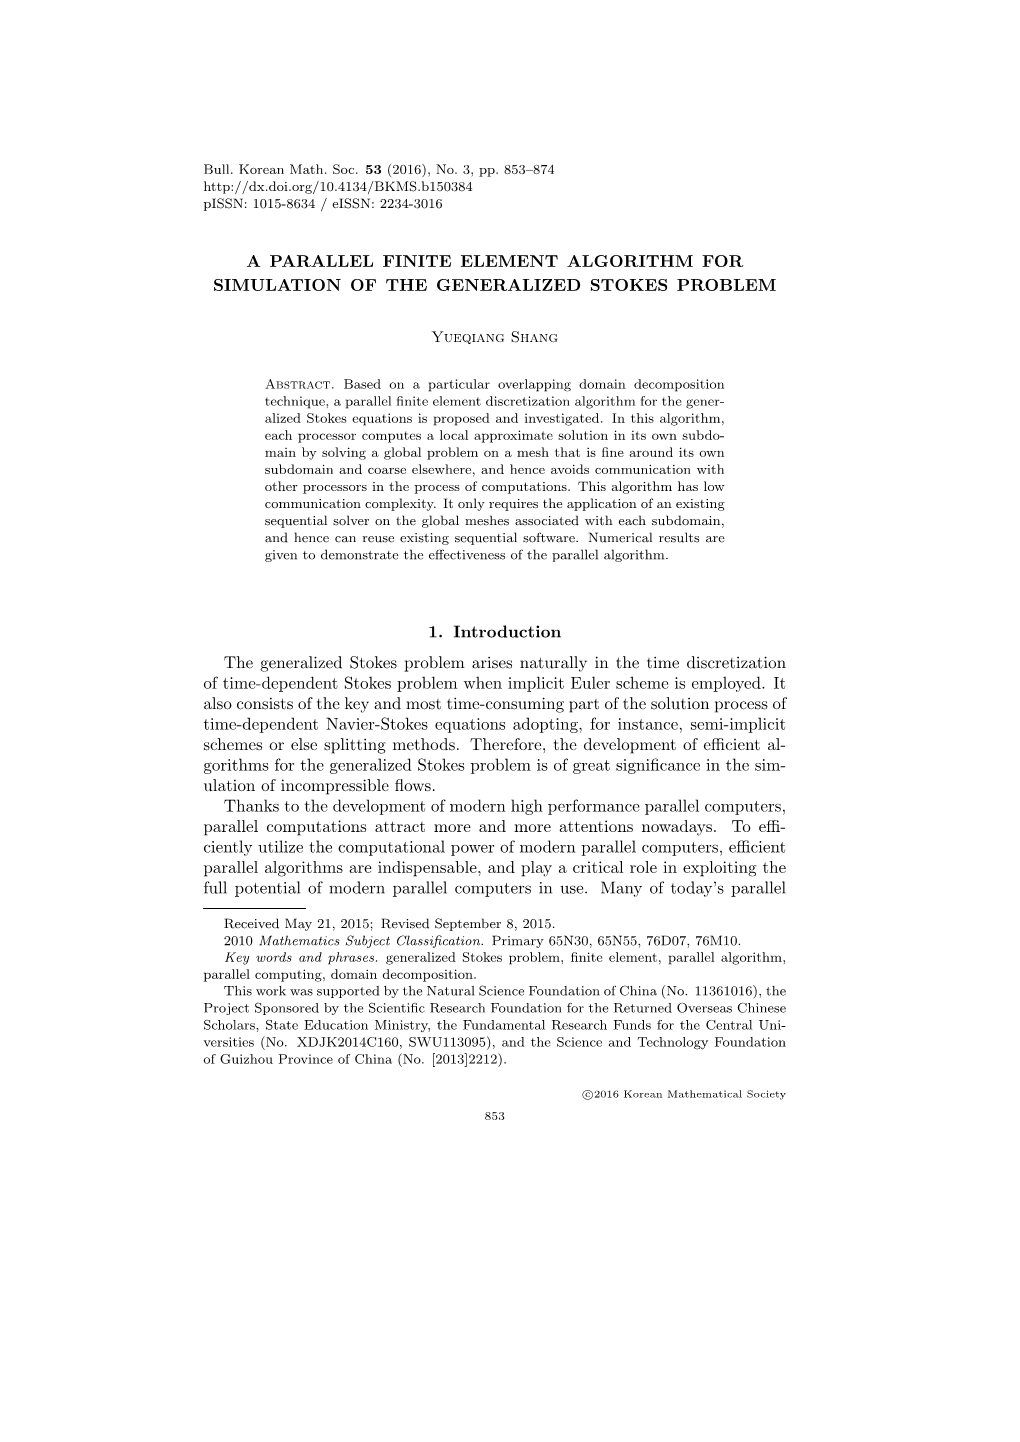 A Parallel Finite Element Algorithm for Simulation of the Generalized Stokes Problem